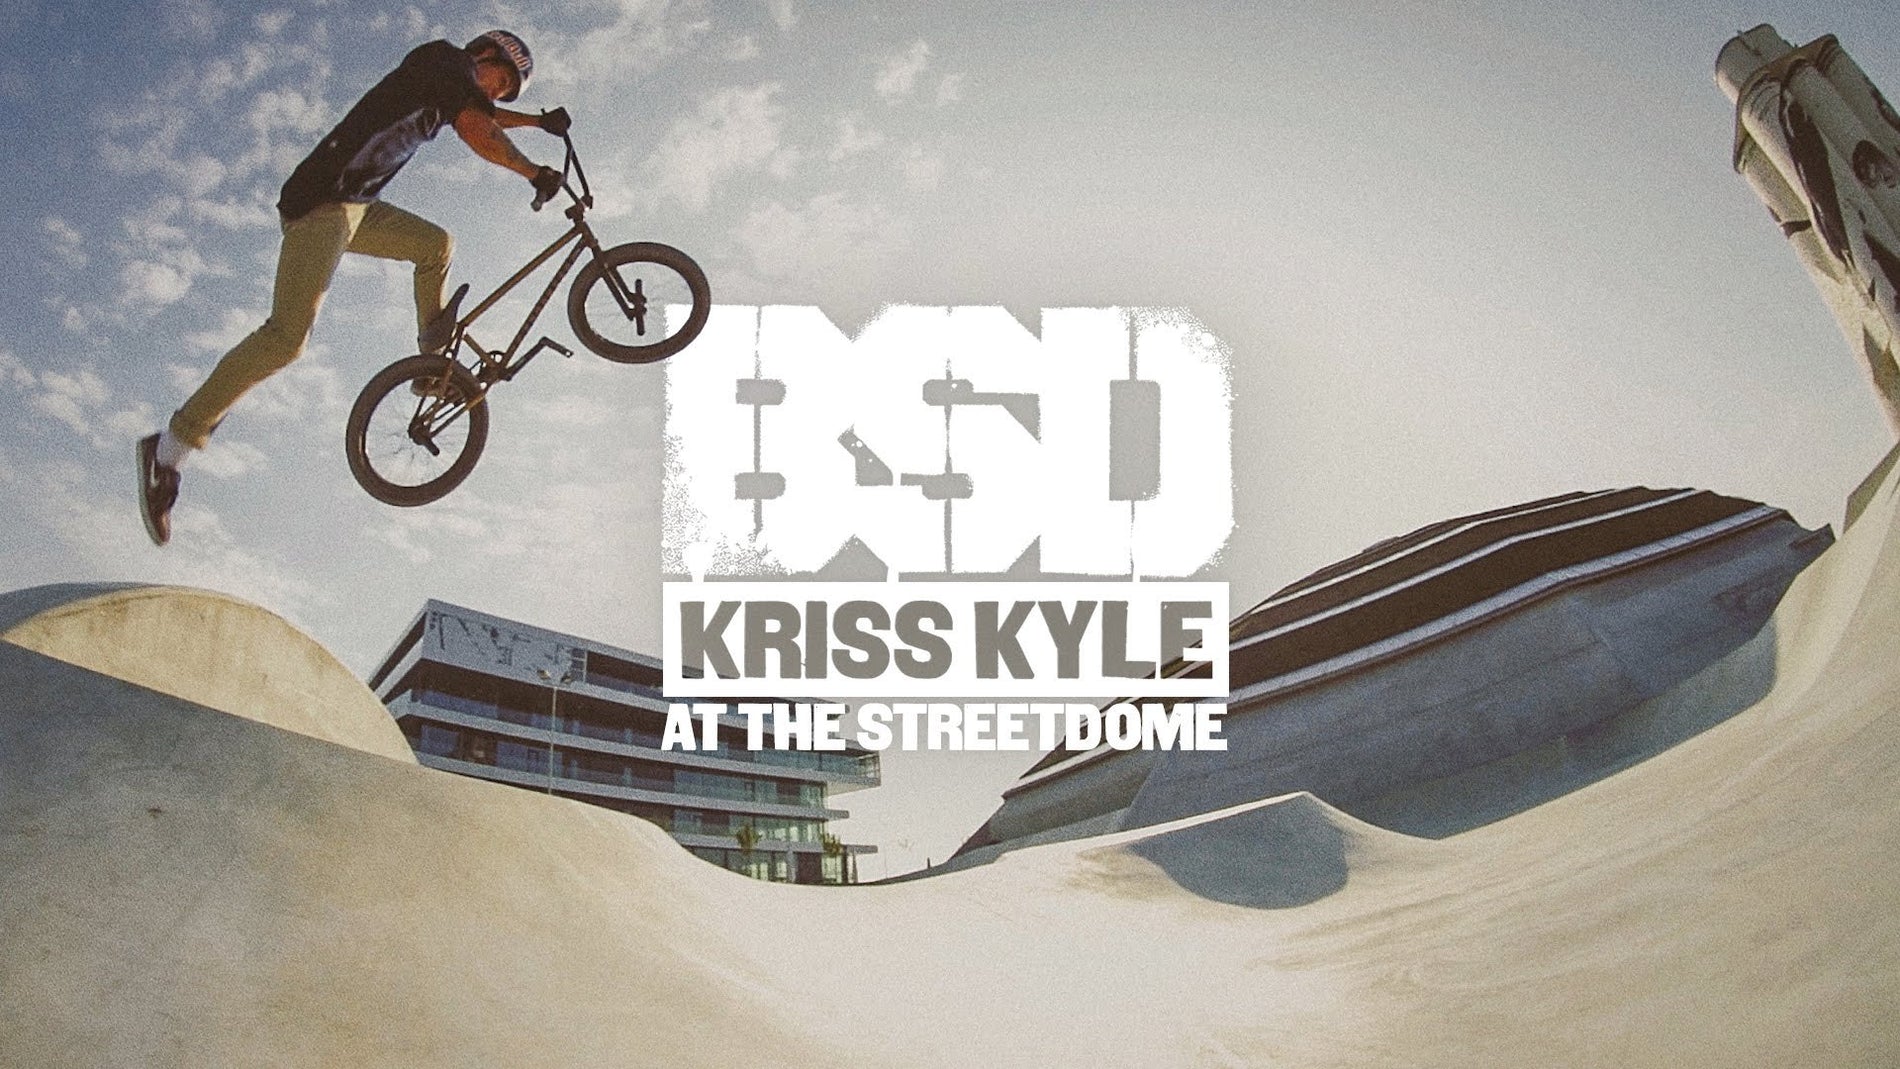 Kriss Kyle at the Streetdome